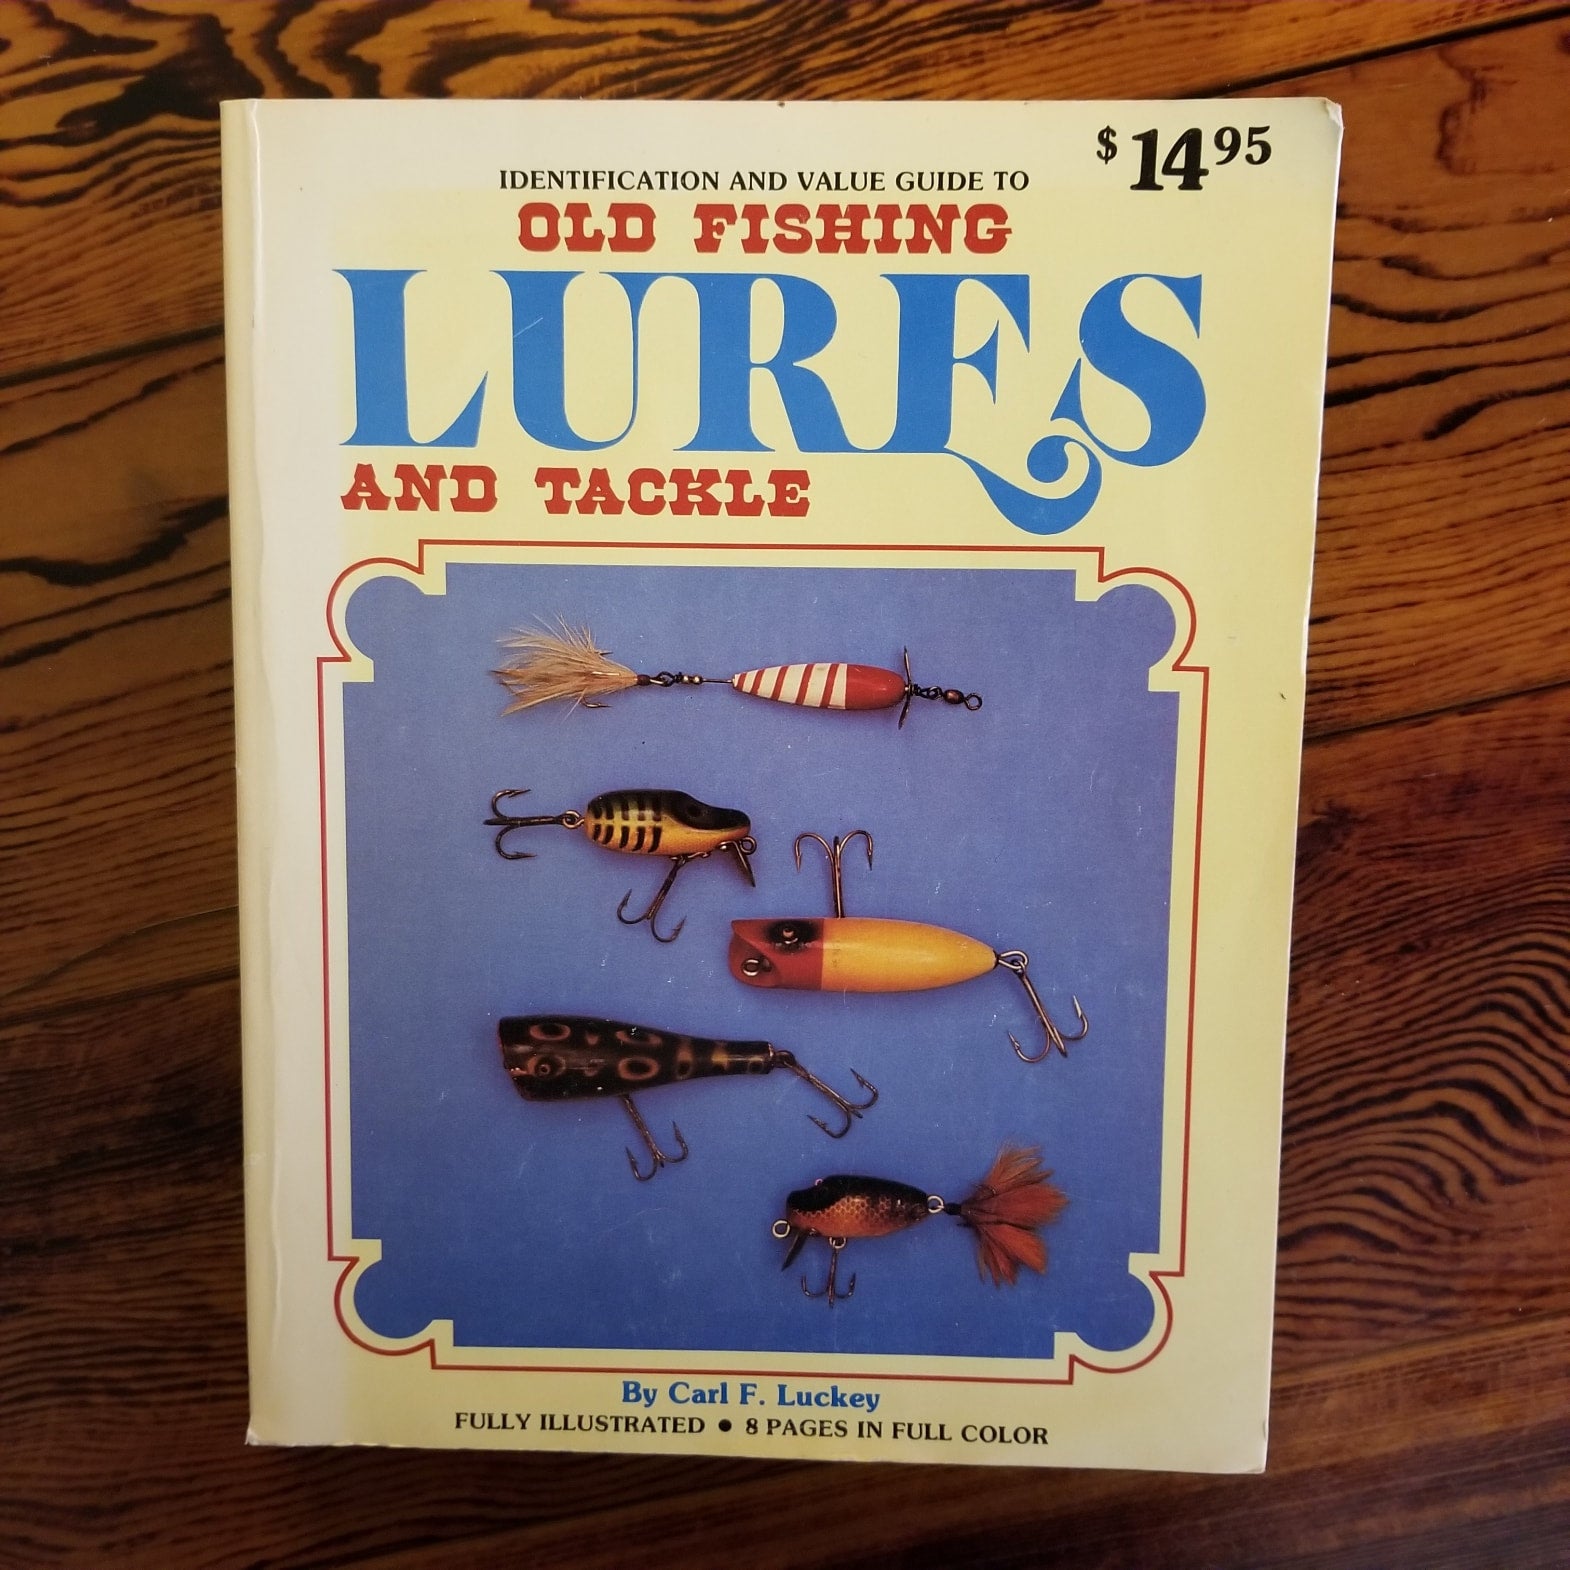 Identification and Value Guide to Old Fishing Lures and Tackle by